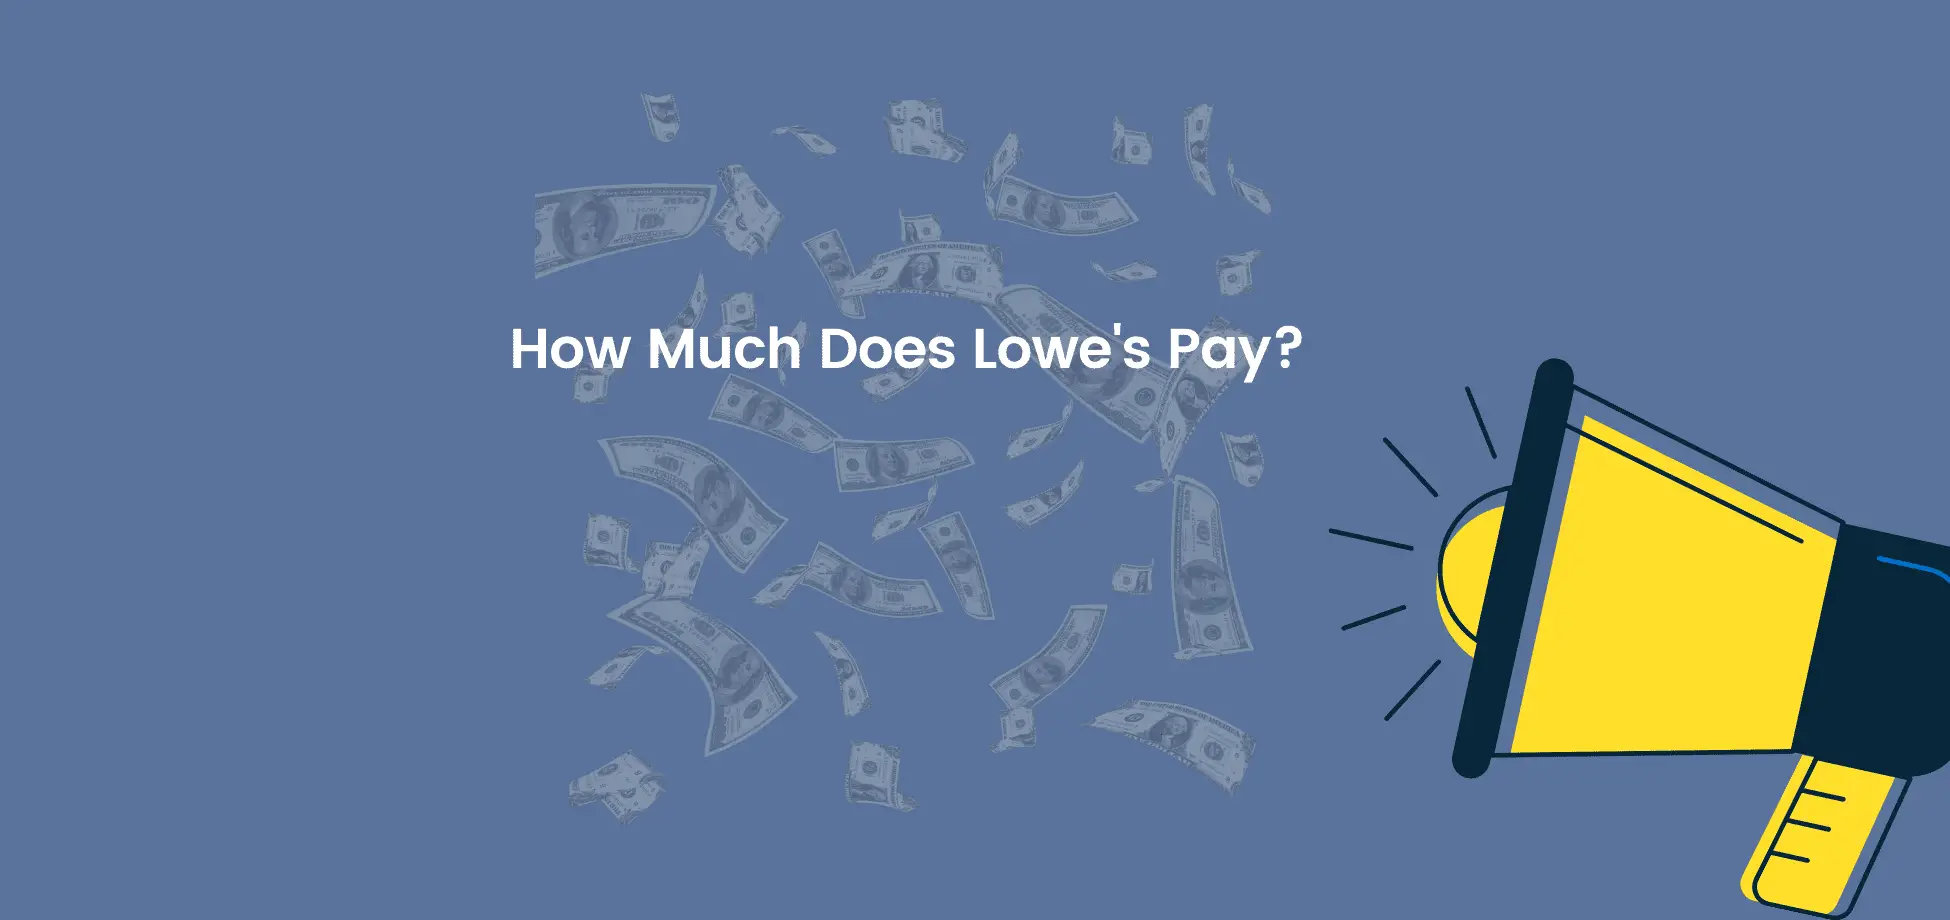 How Much Does Lowe's Pay